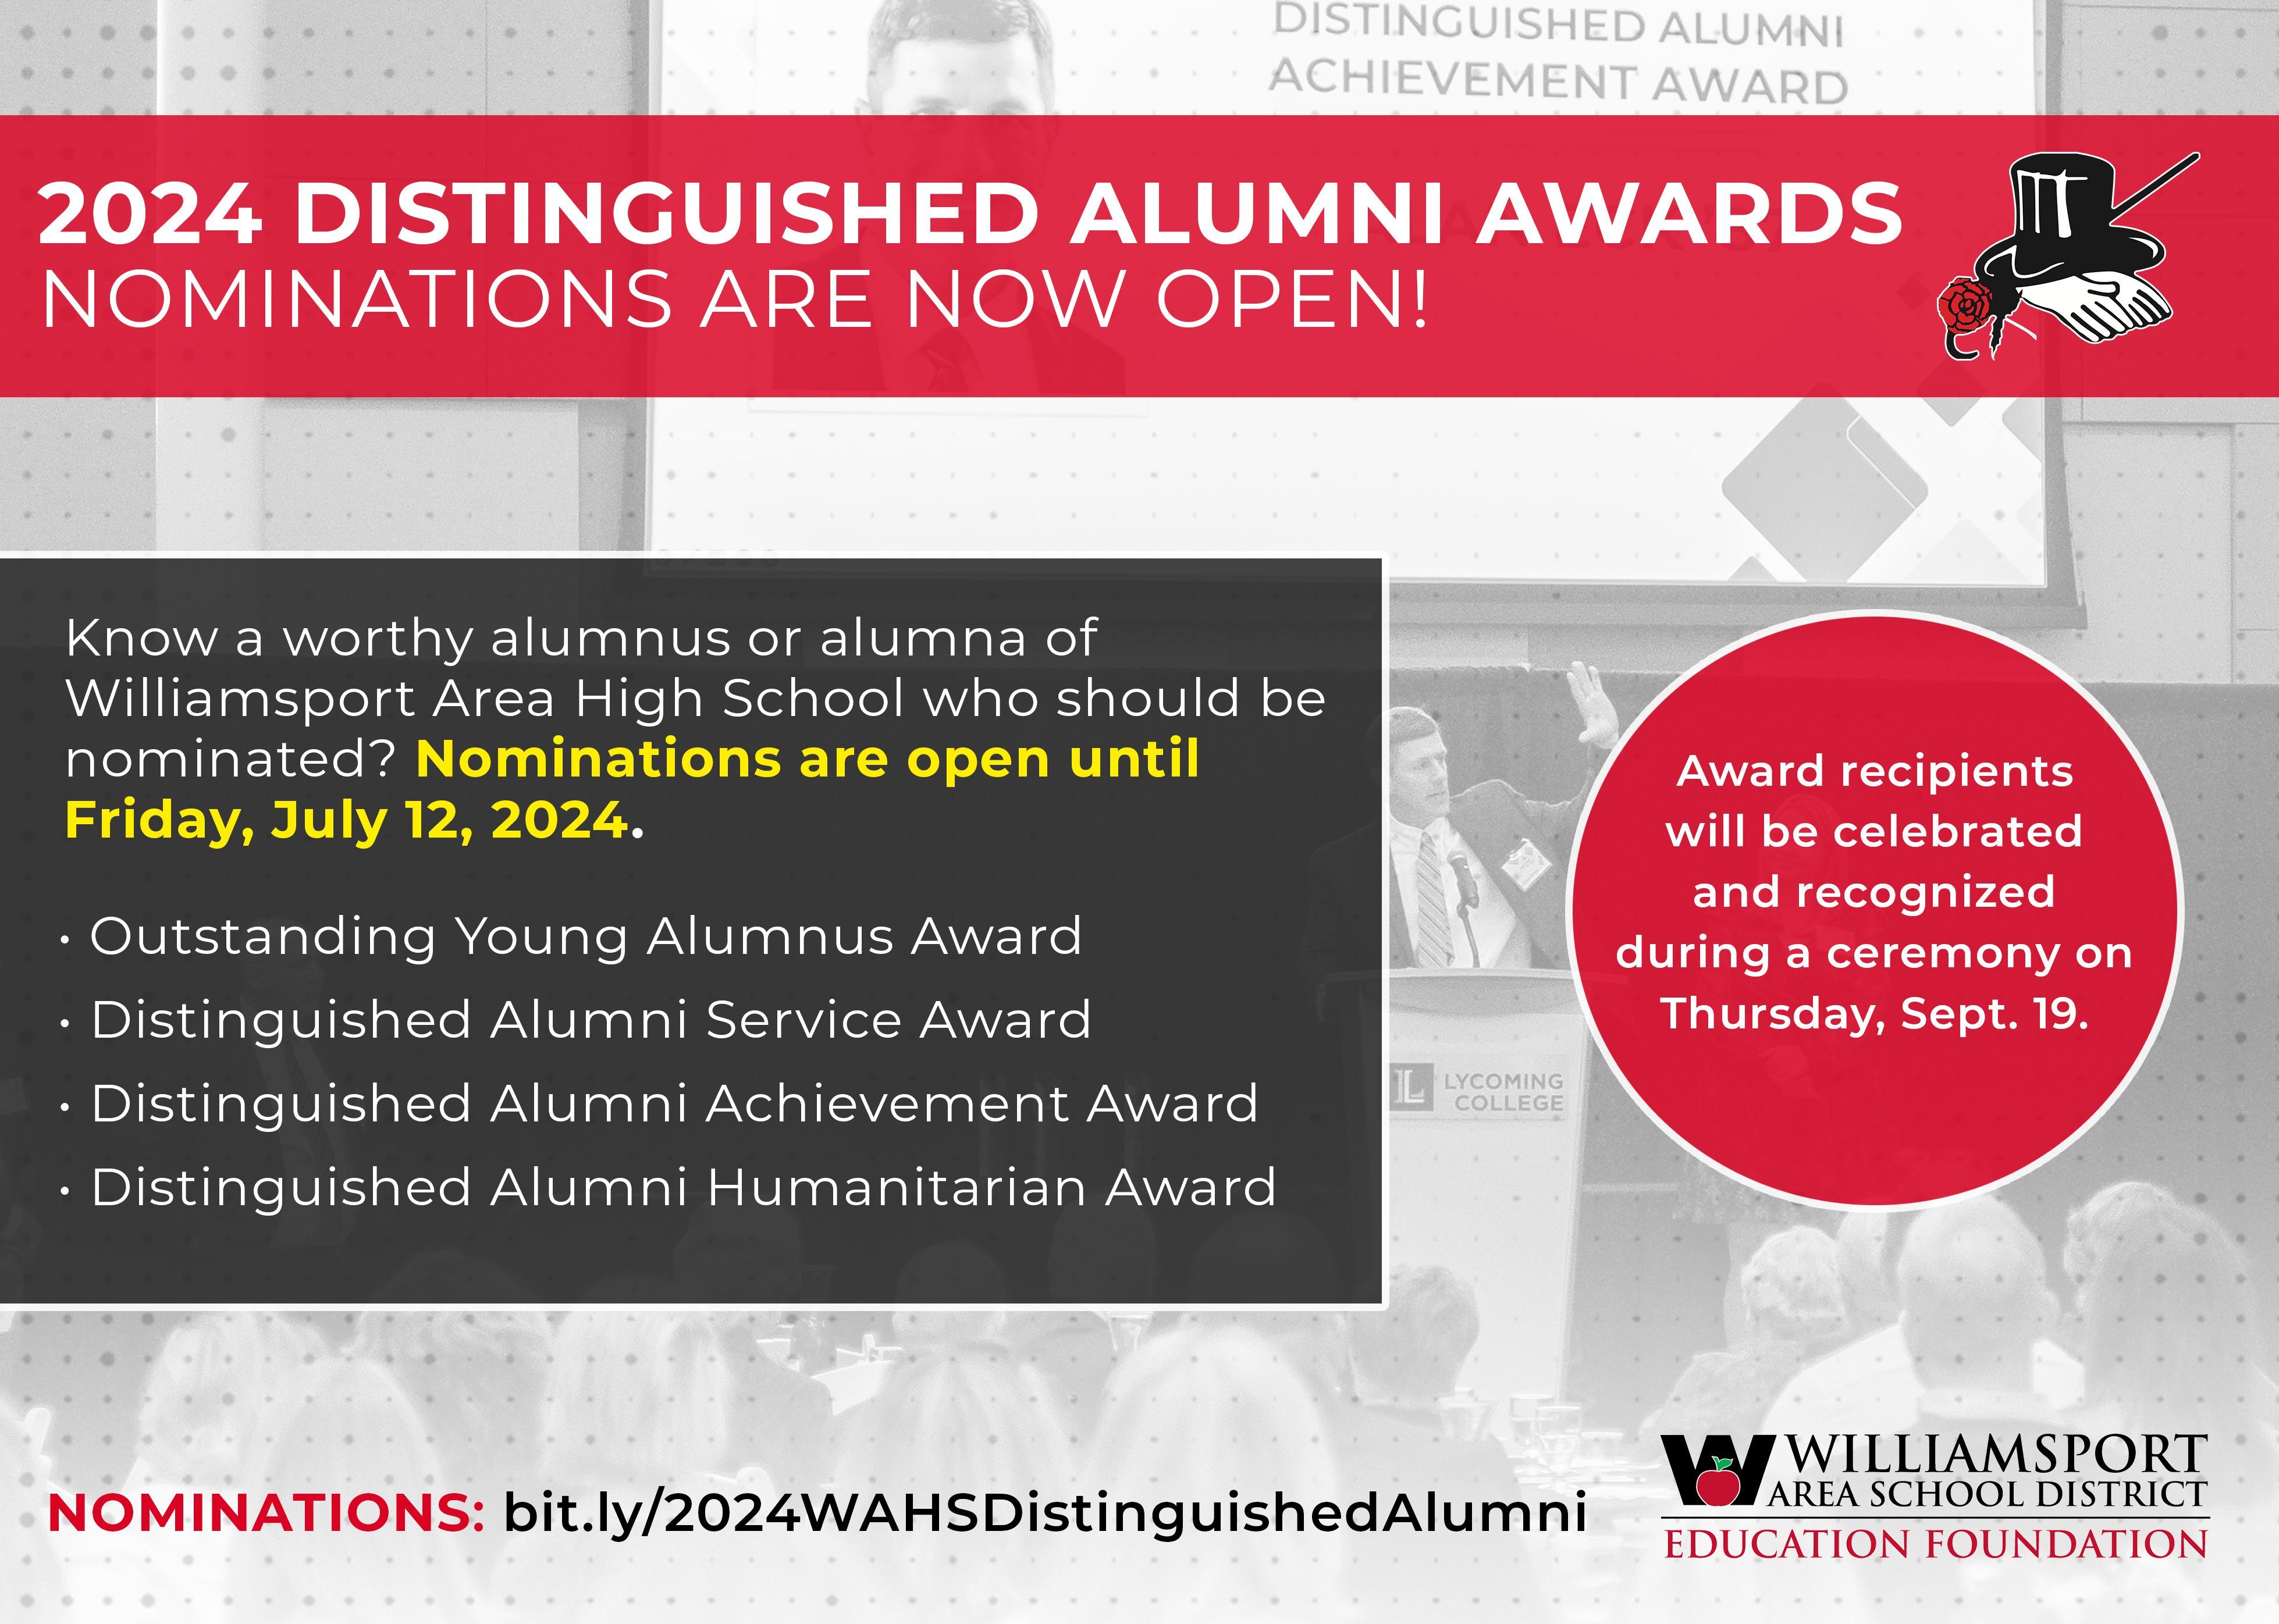 Nominations Sought for WAHS 2024 Distinguished Alumni Awards